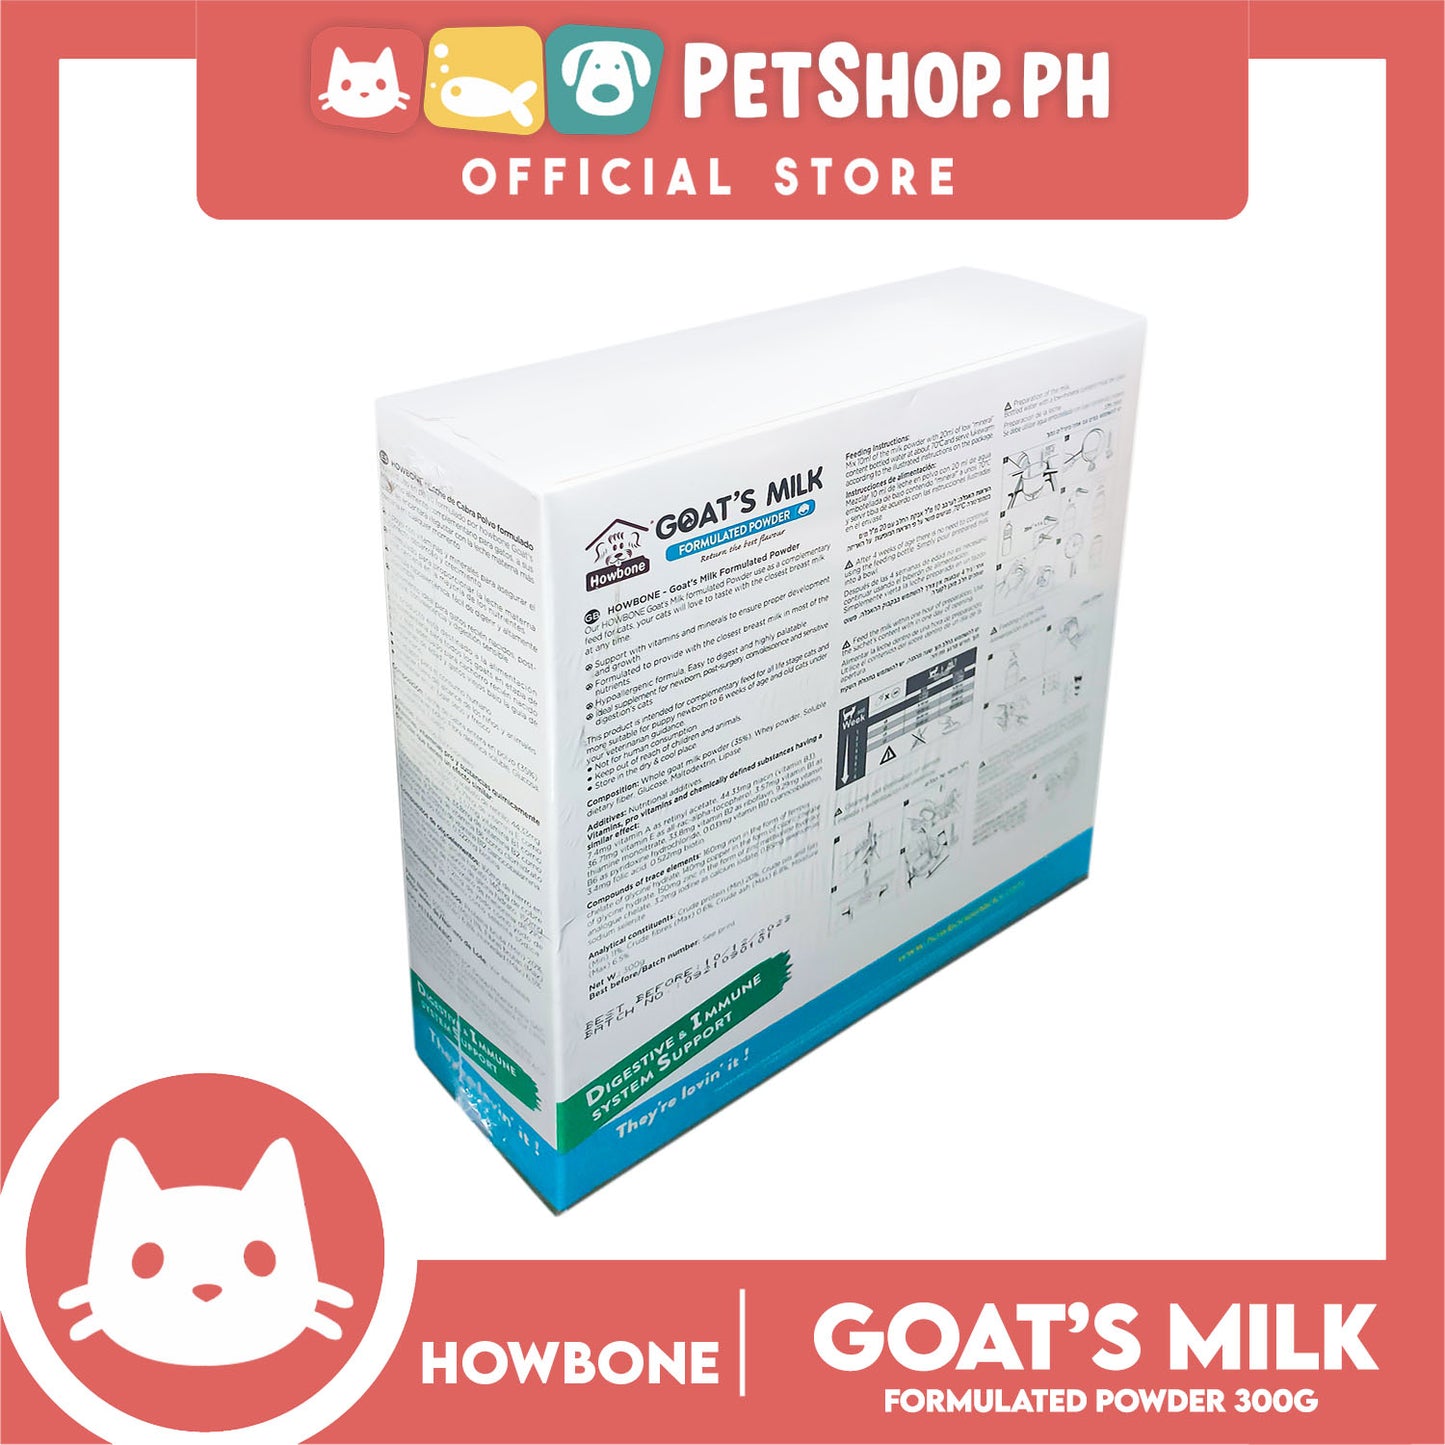 Howbone Goat's Milk Formulated Powder For Cats 12g x 24pcs. Digestive And Immune System Support For Cats